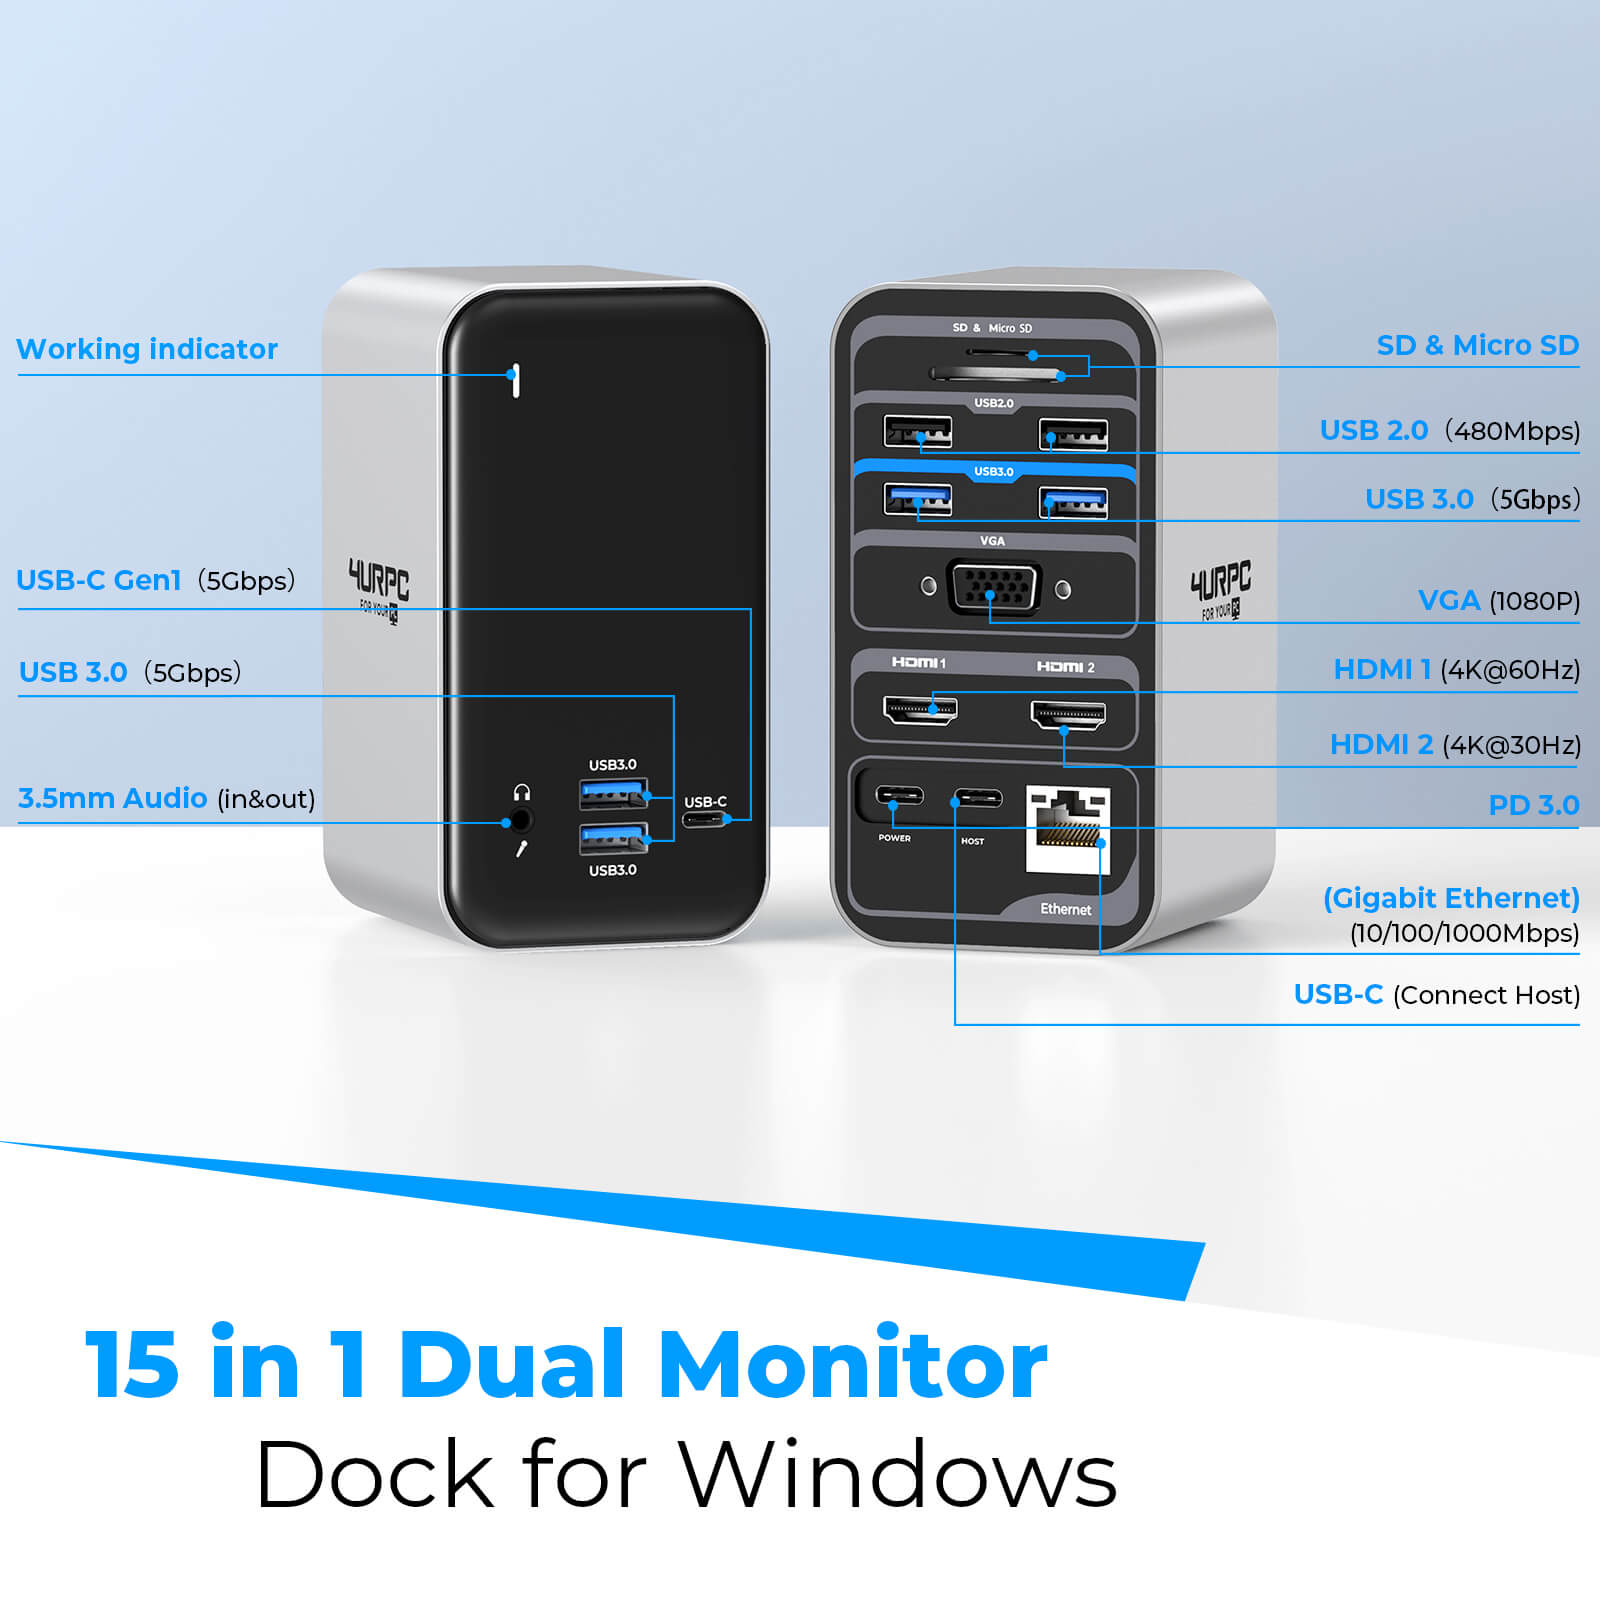 15 In 1 Dual Monitor Dock for Windows